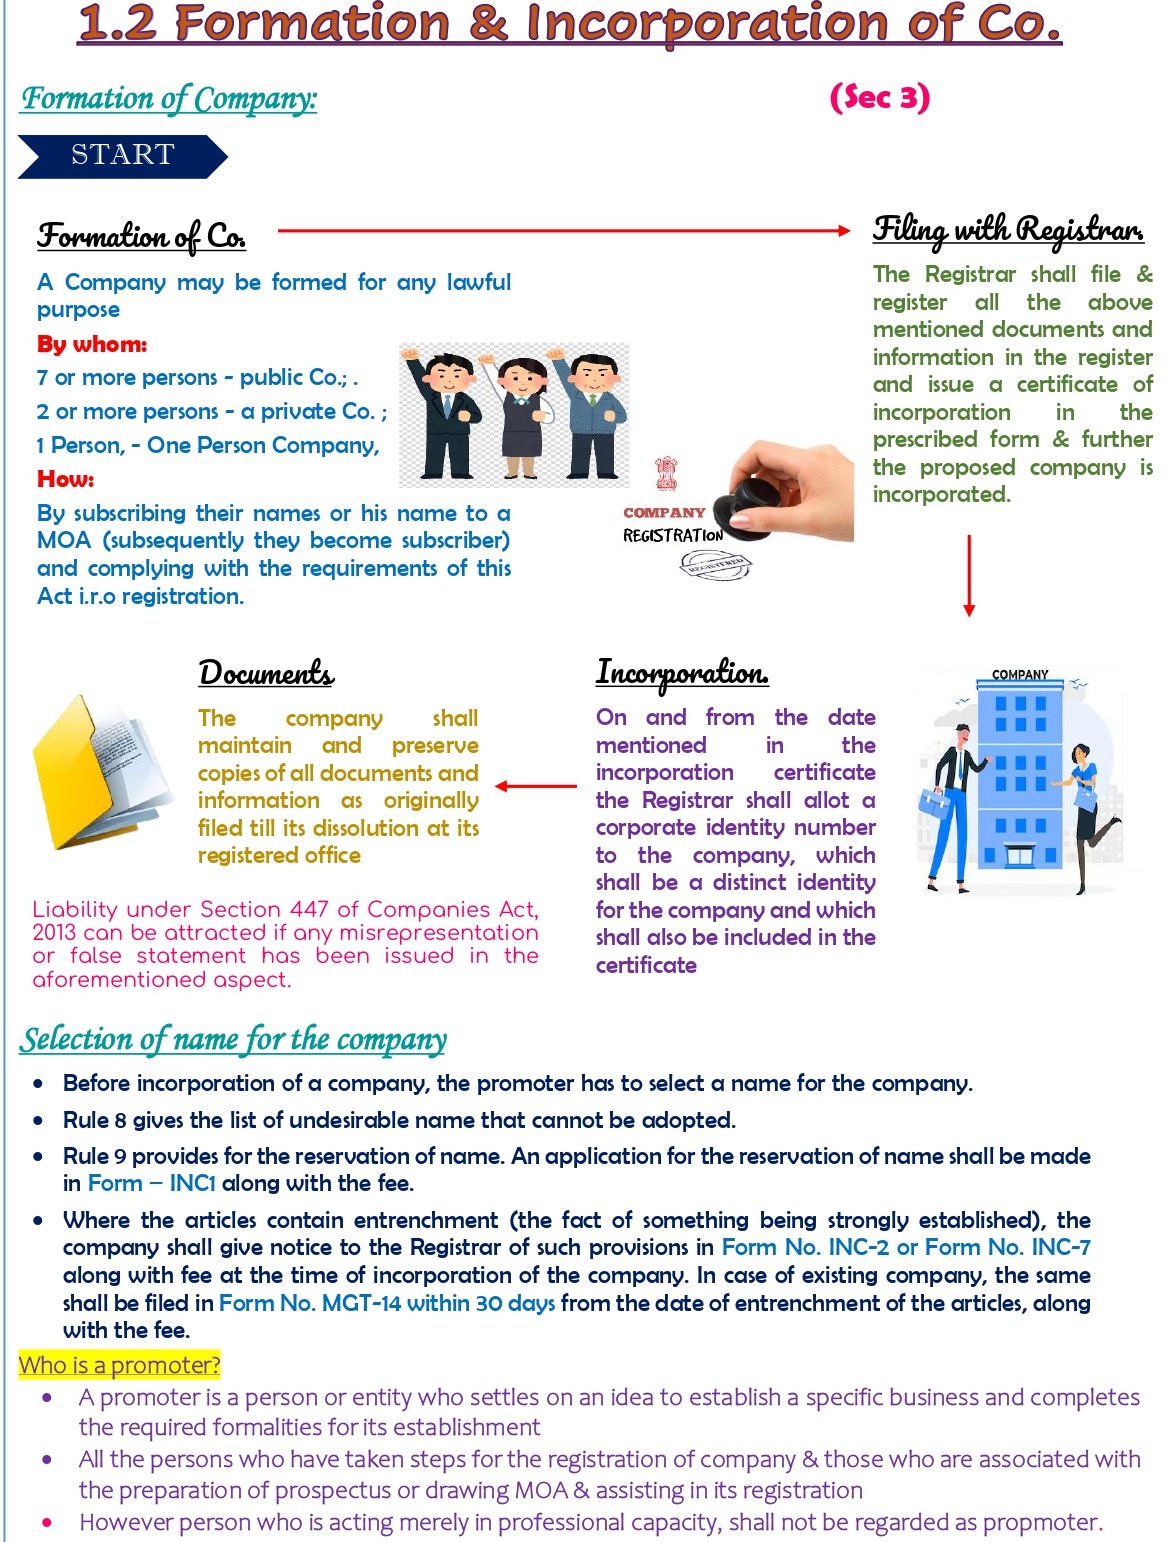 Formation of Companies_1